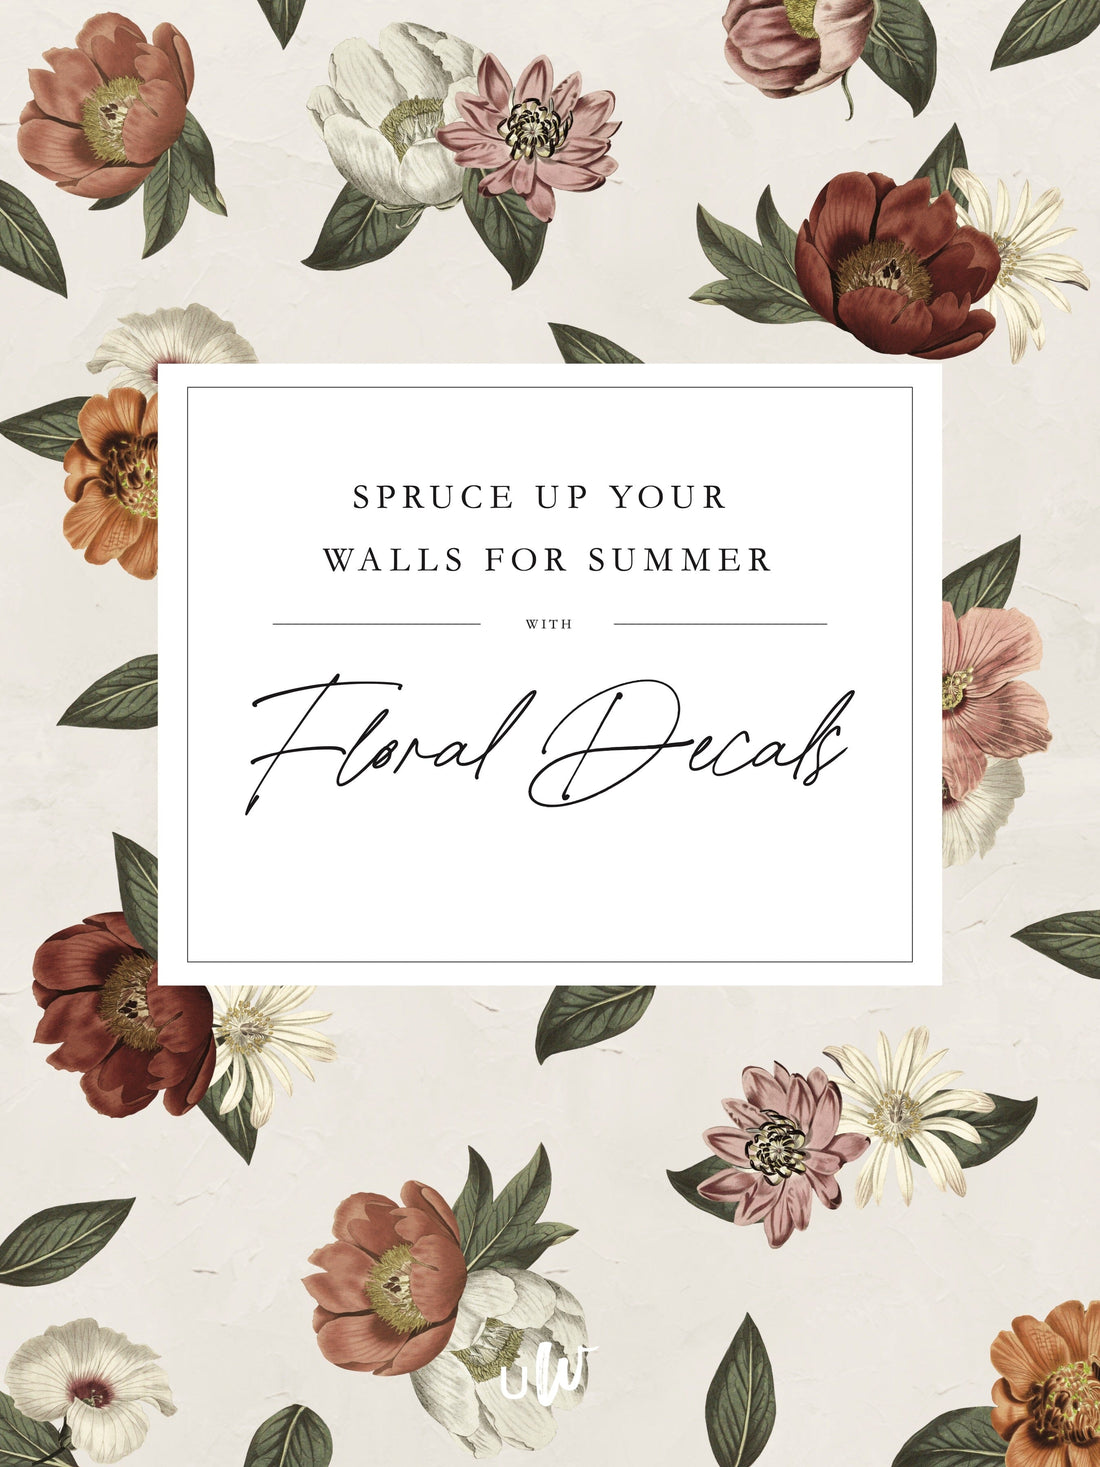 Spruce Up Your Walls for Summer with Vinyl Flower Decals